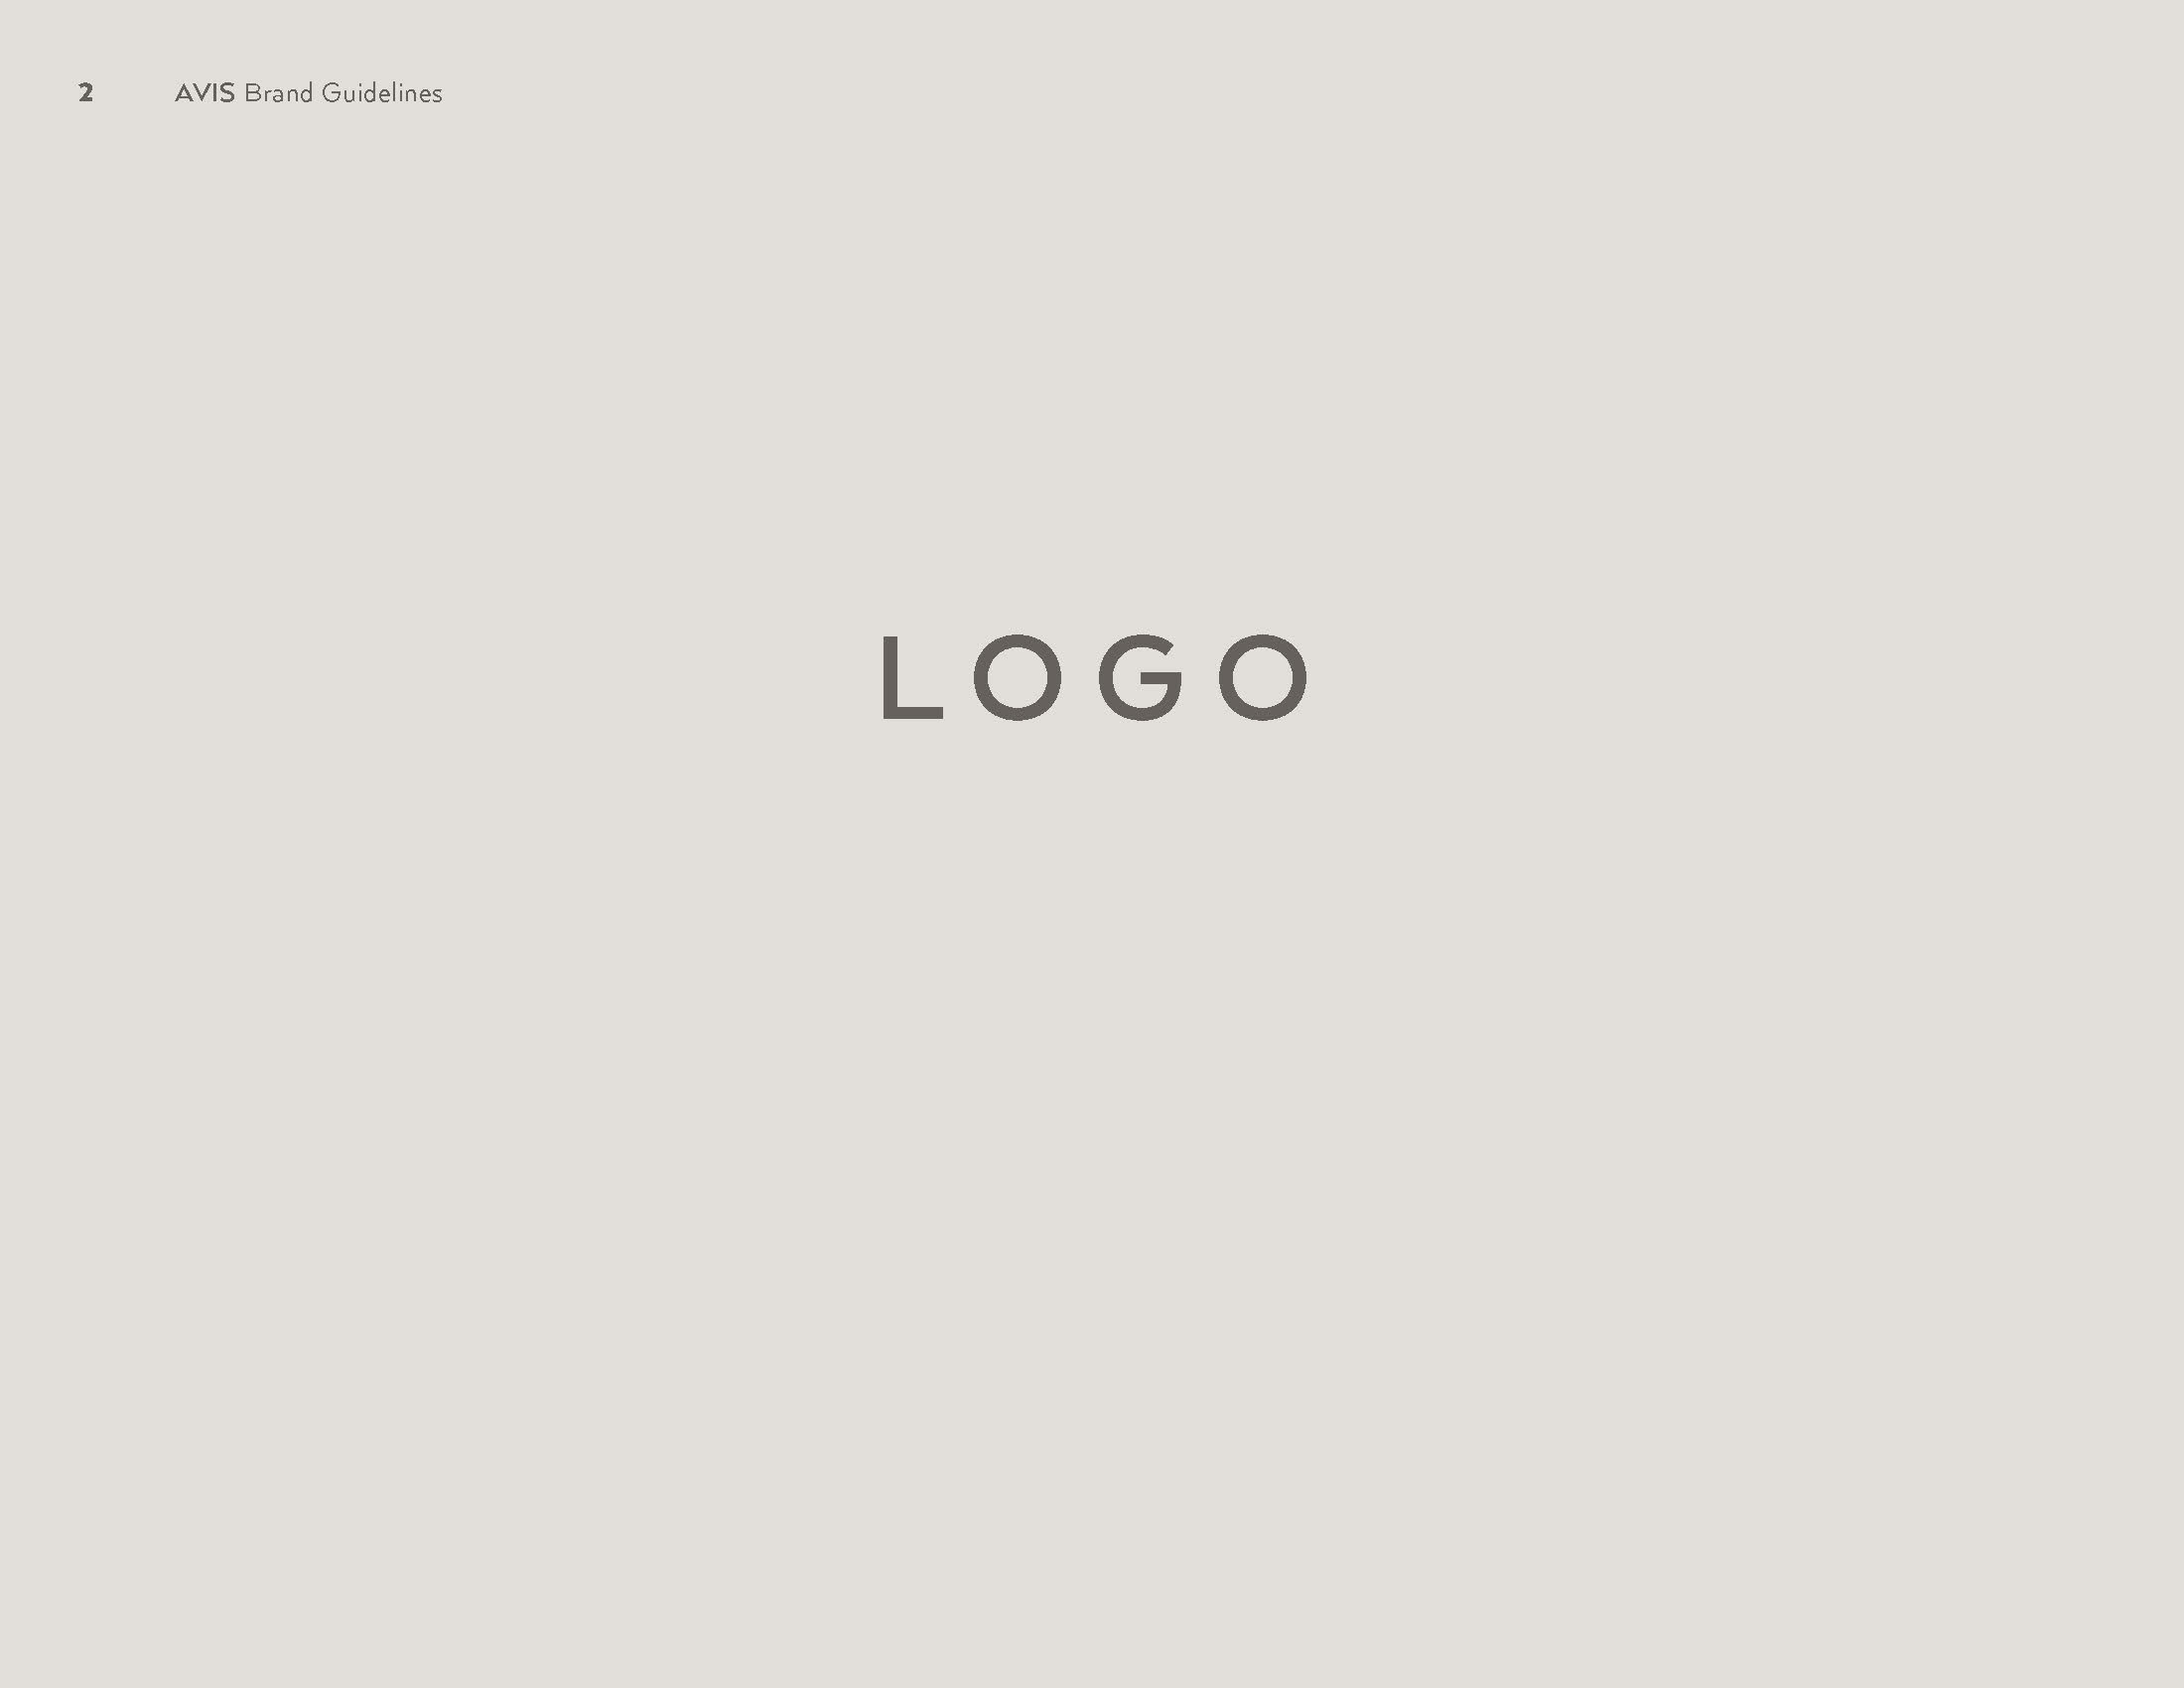 Avis Now Brand Guidelines v8_Page_04